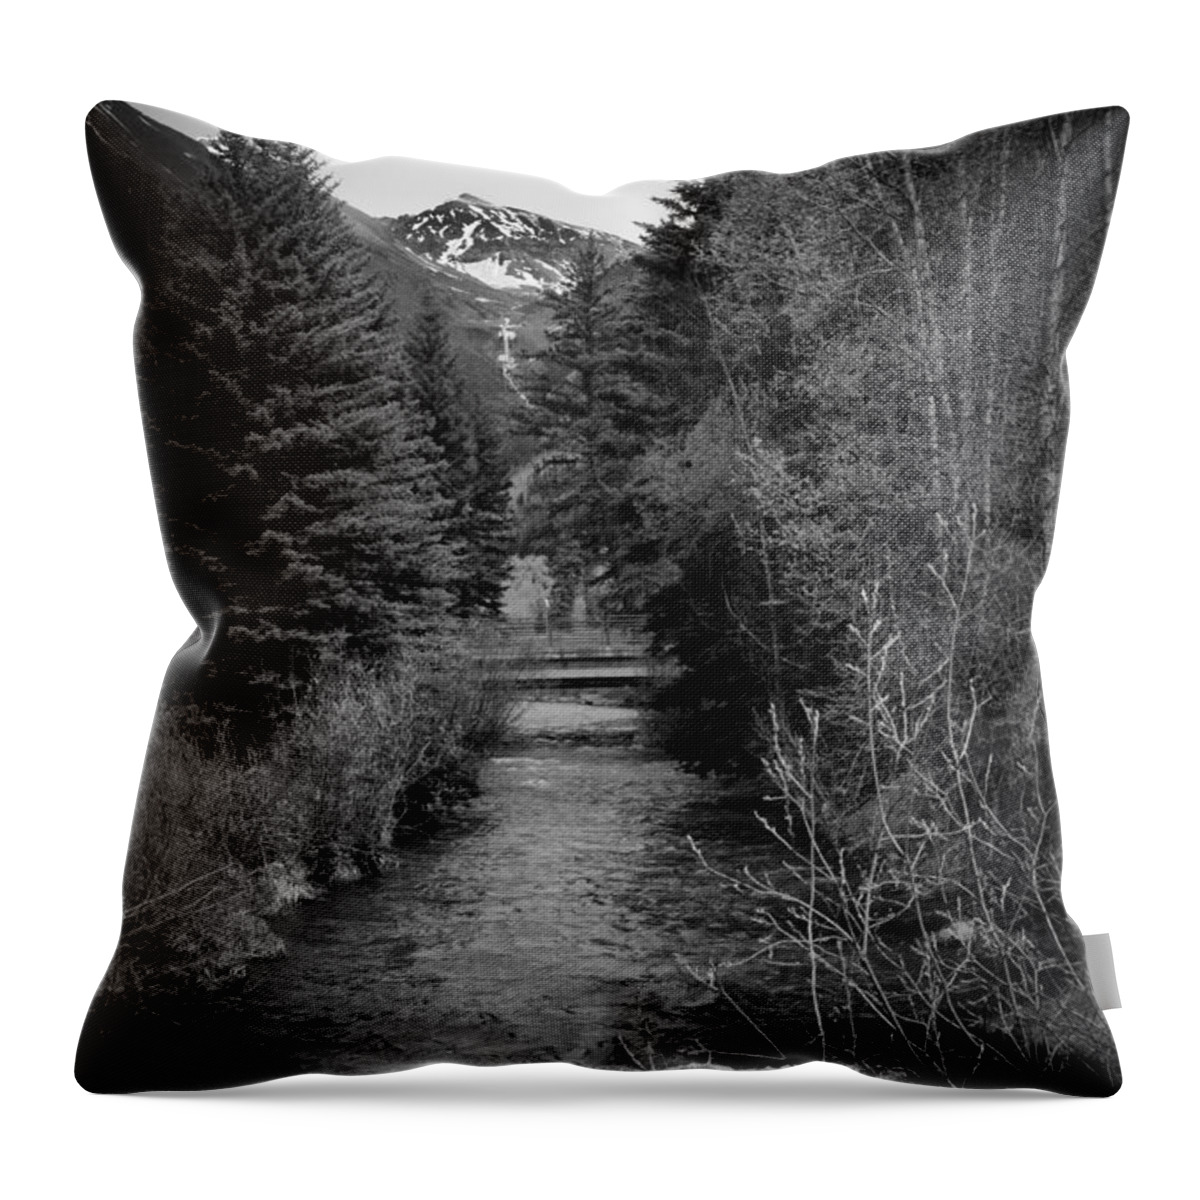 Telluride Throw Pillow featuring the photograph Telluride Stream by Debbie Karnes